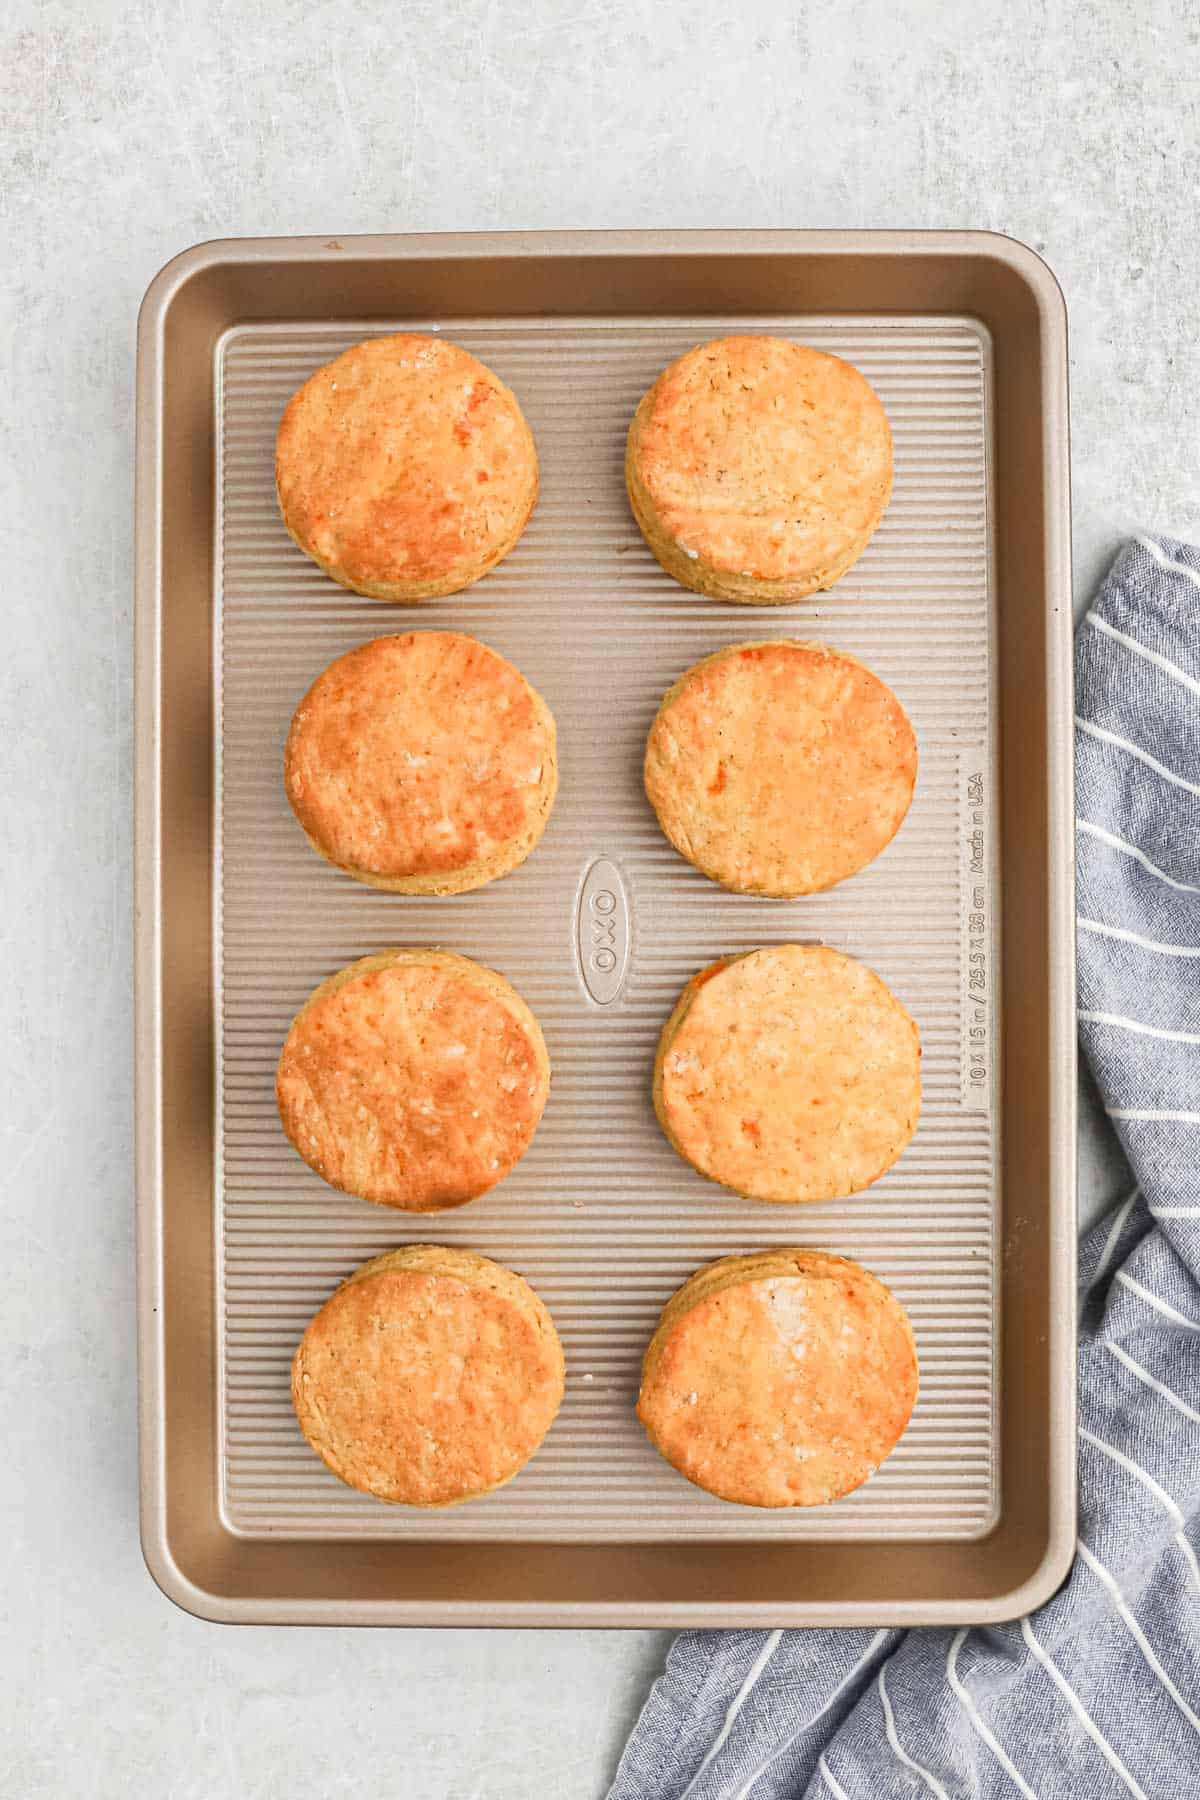 Cooked sweet potato biscuits on a baking tray.